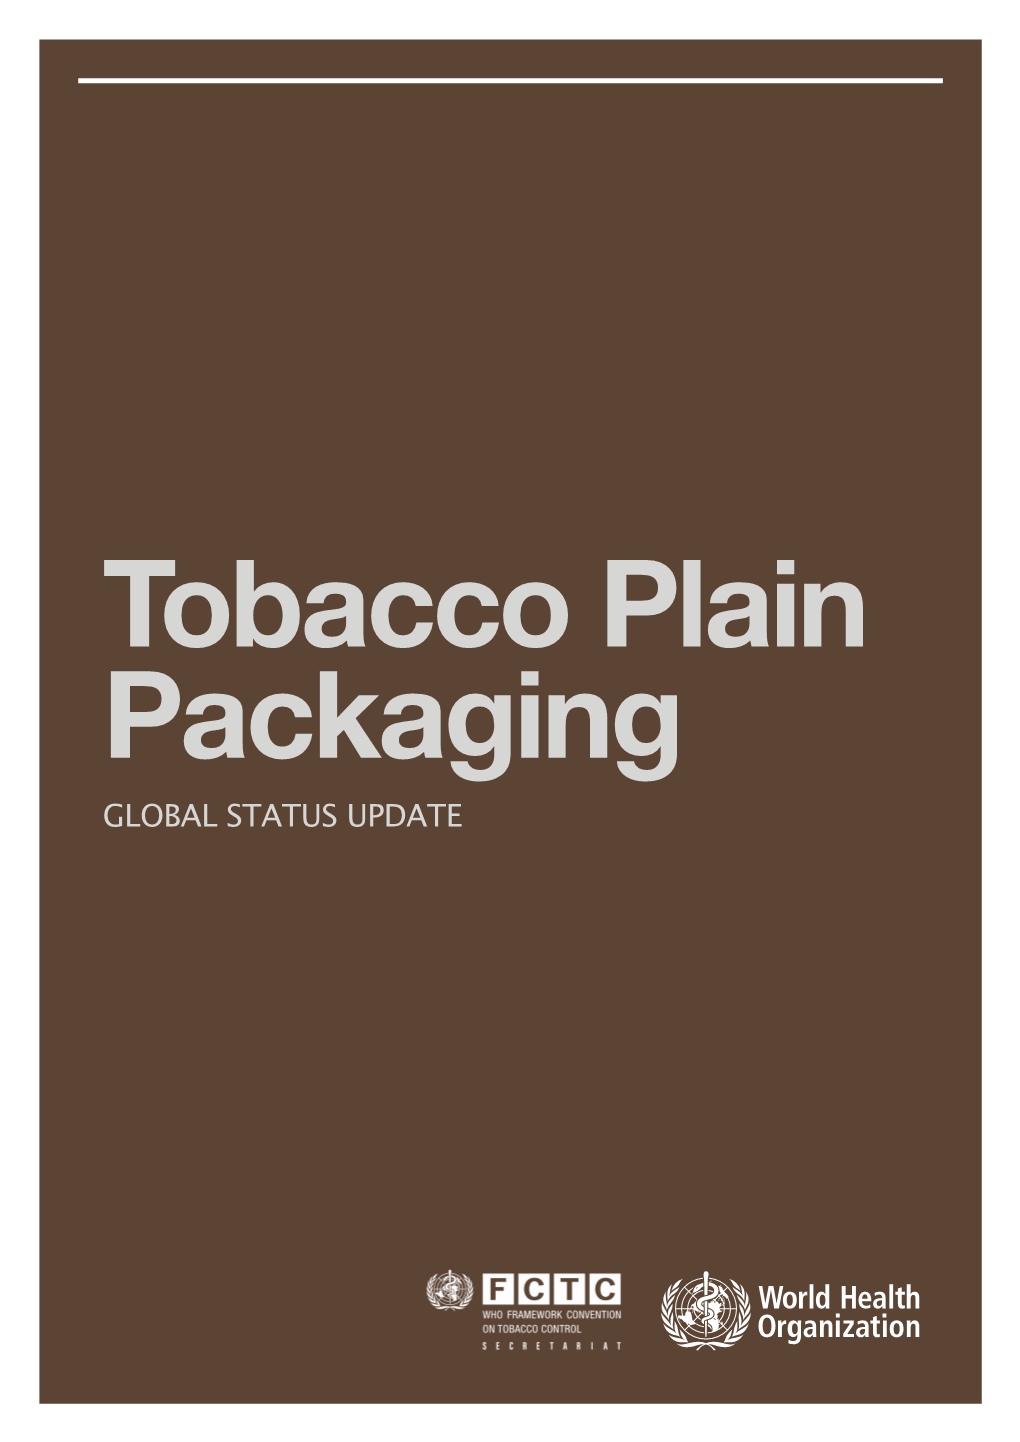 Plain Packaging of Tobacco Products